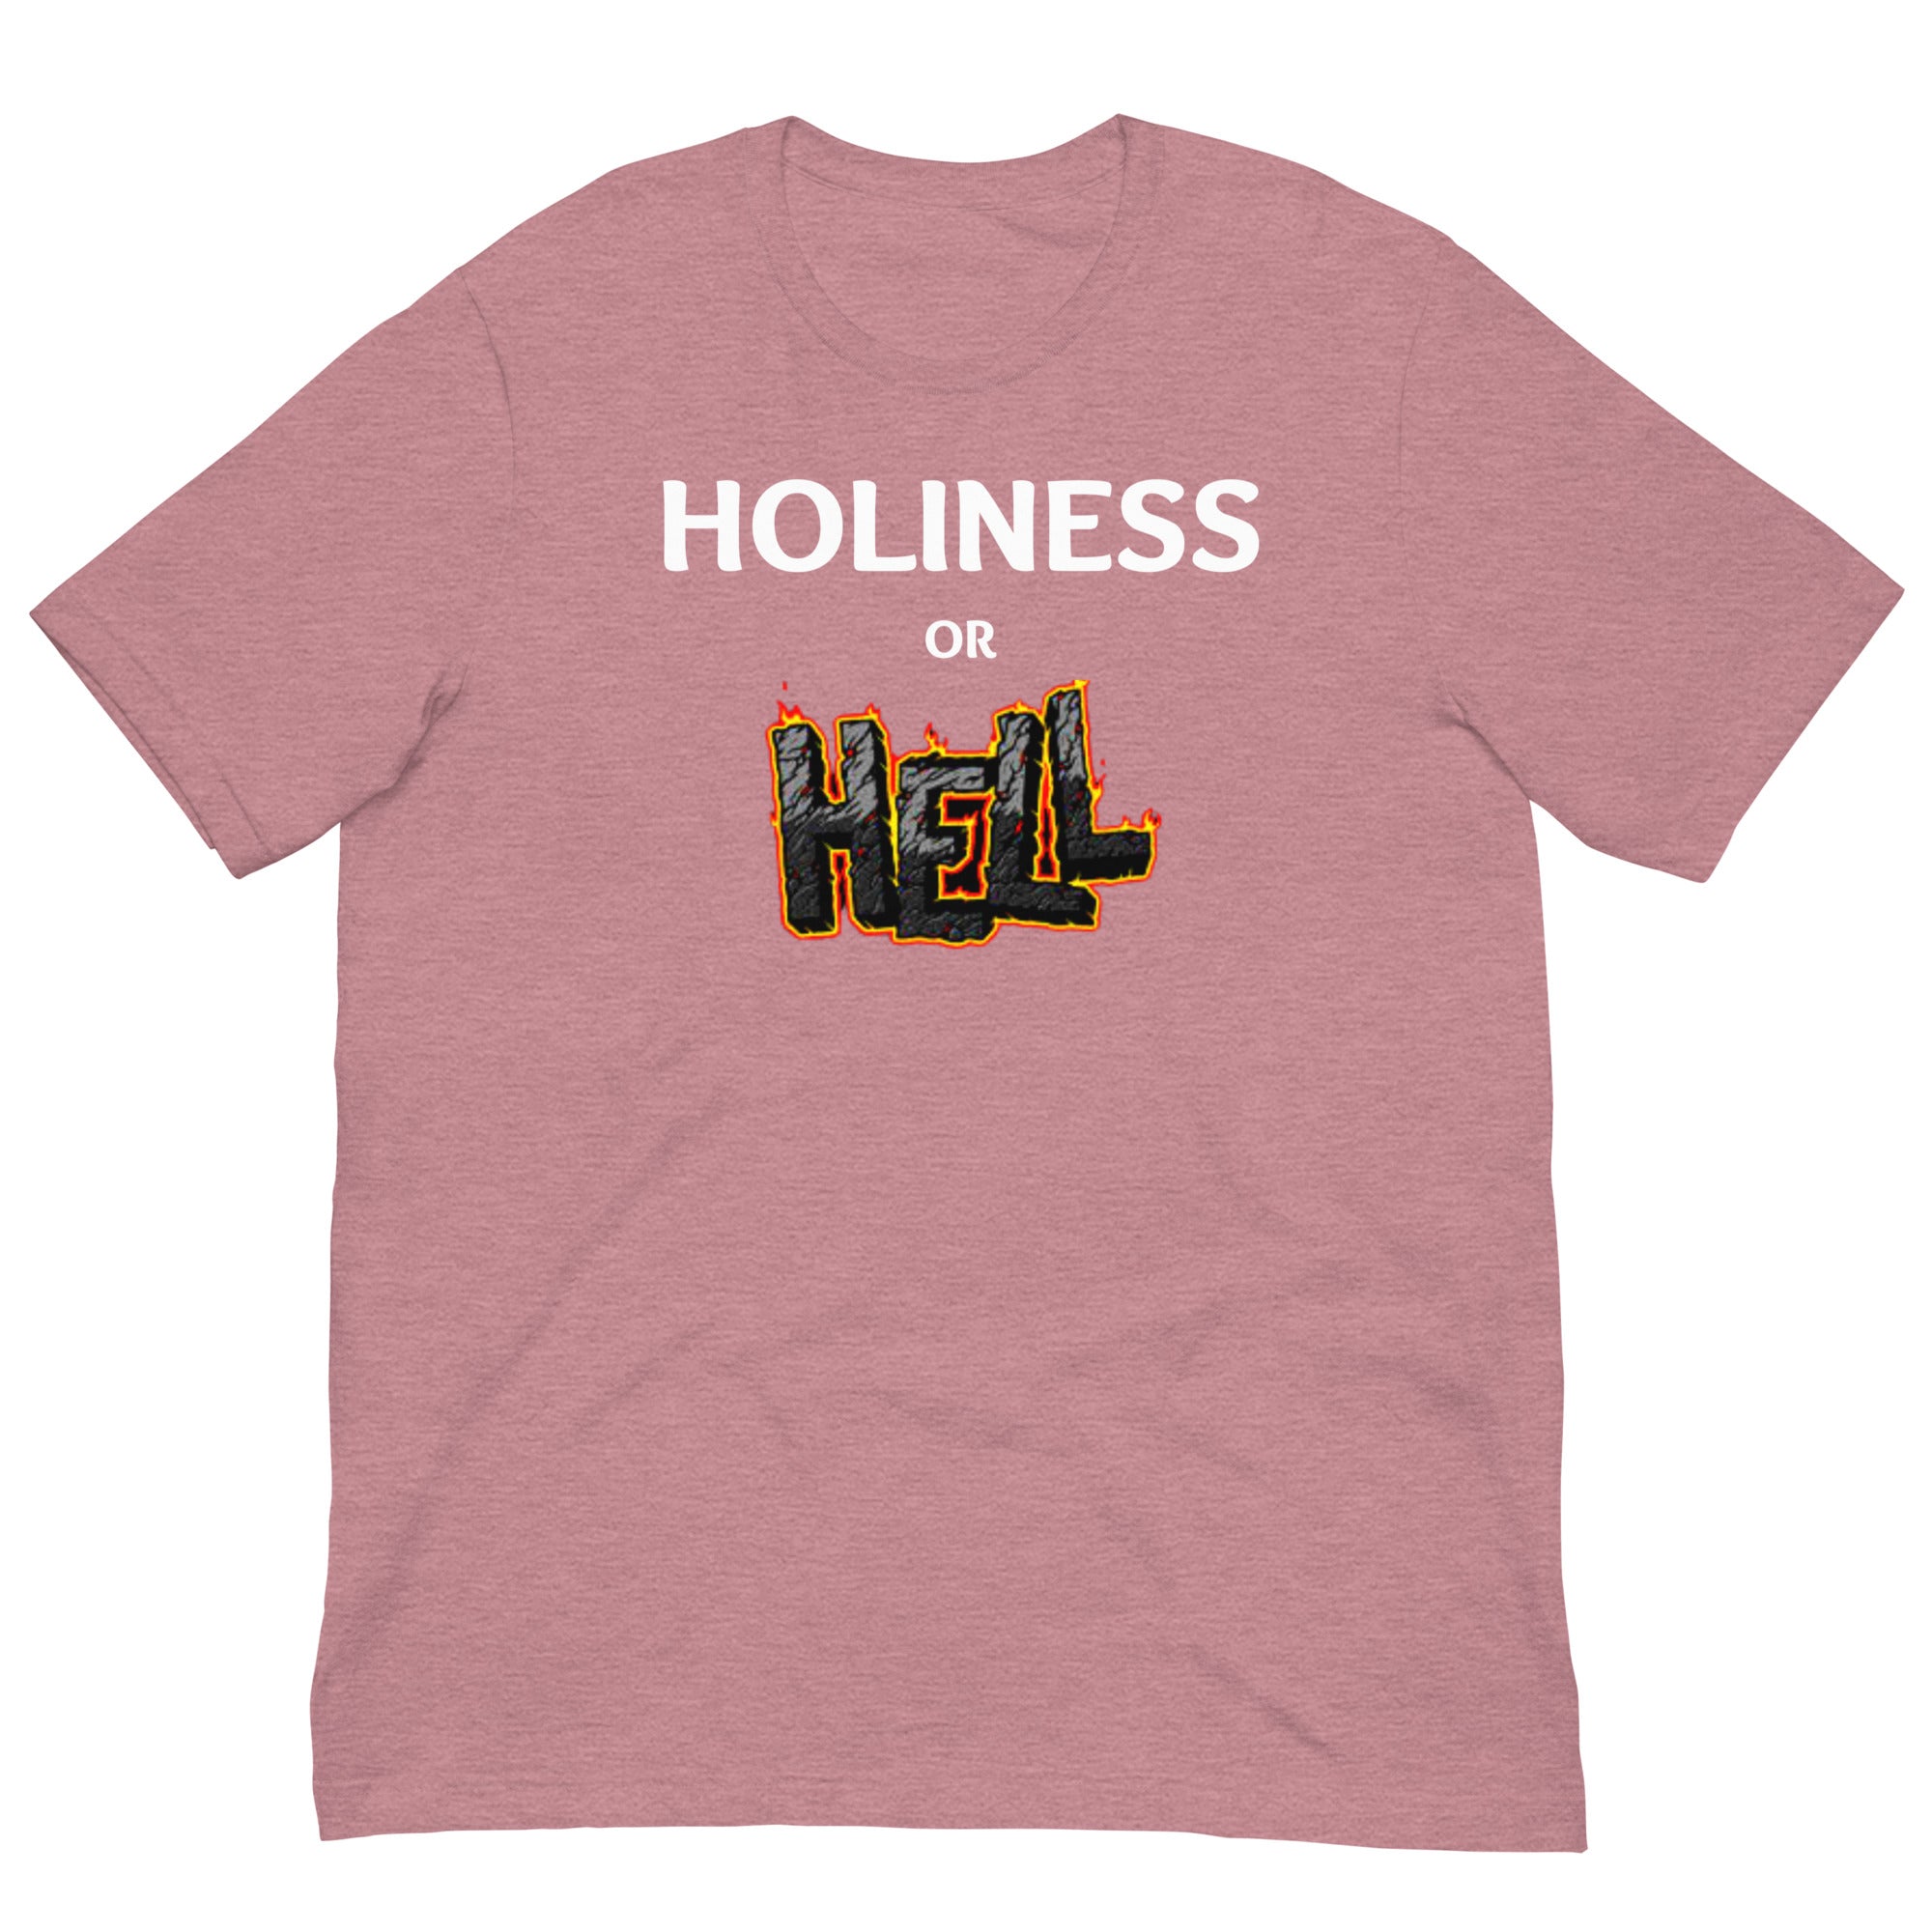 Holiness or Hell Unisex t-shirt